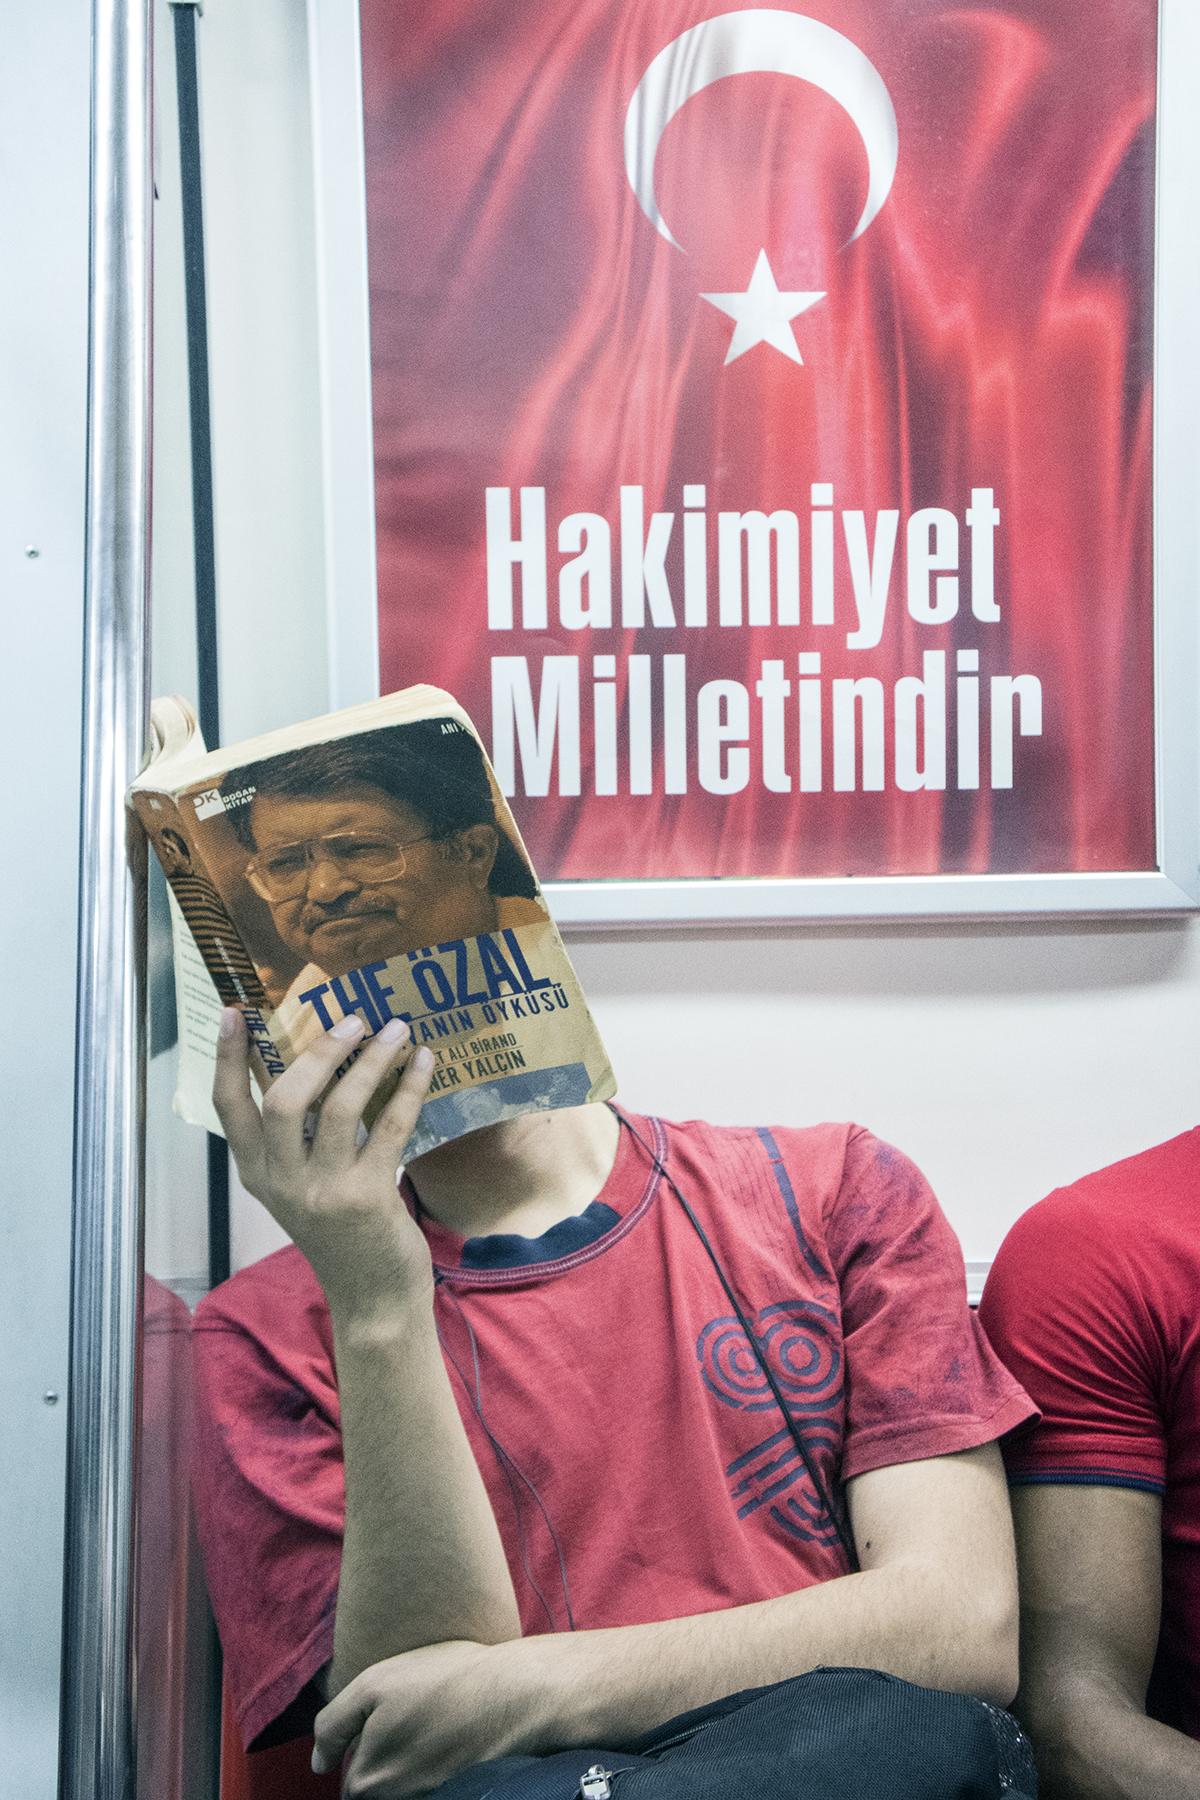 Day 216 —Hacıosman Subway -
A university student reads his book on the subway.
